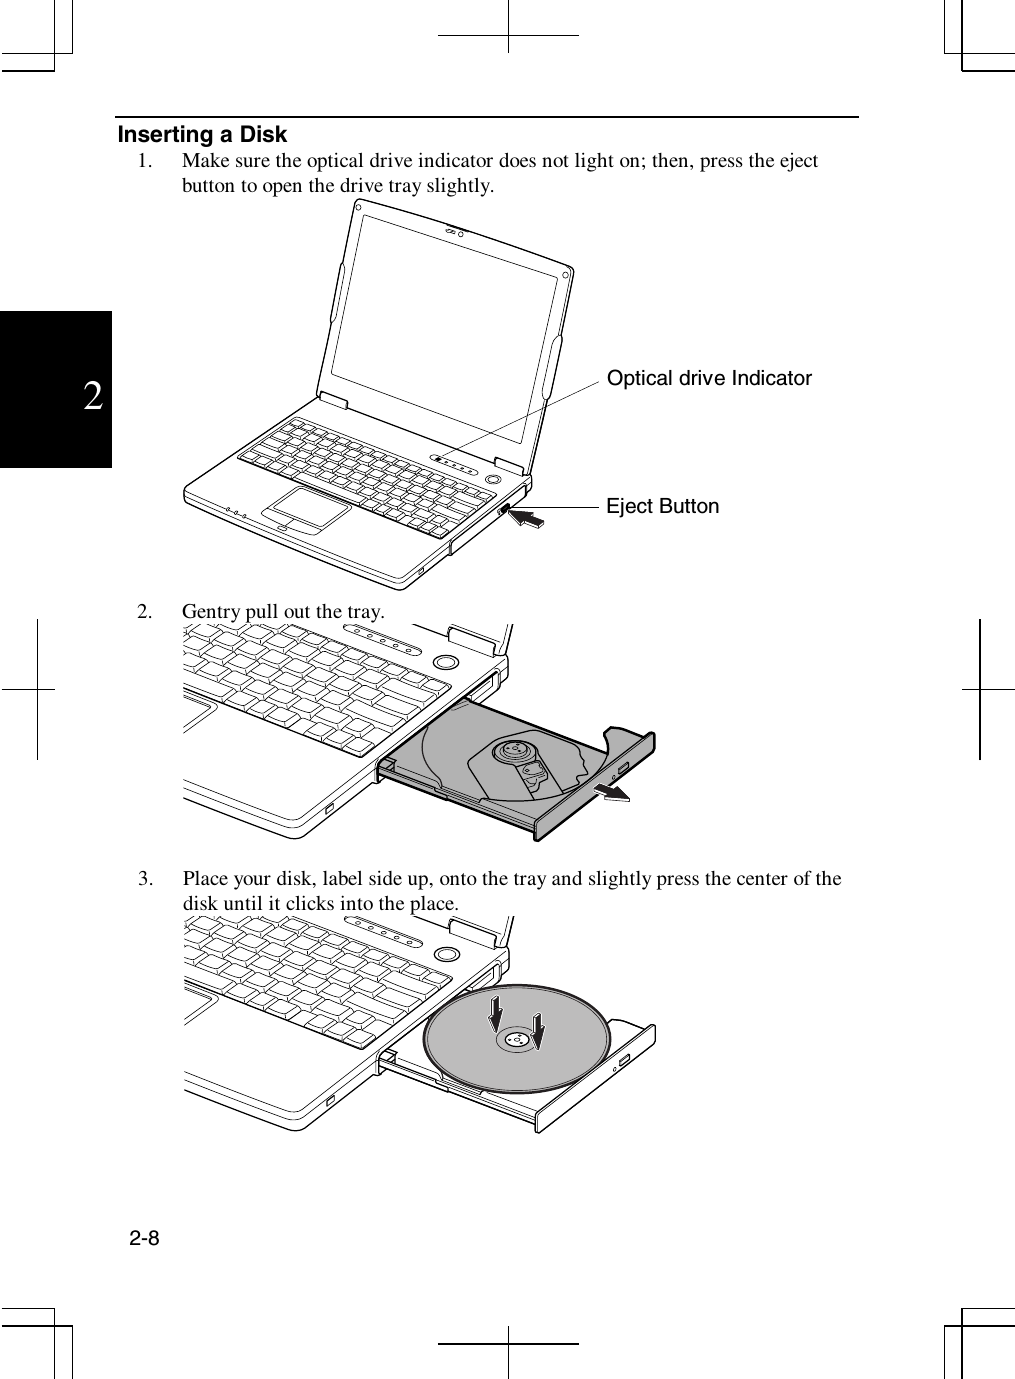 2-82Inserting a Disk1. Make sure the optical drive indicator does not light on; then, press the ejectbutton to open the drive tray slightly.2. Gentry pull out the tray.3. Place your disk, label side up, onto the tray and slightly press the center of thedisk until it clicks into the place.Optical drive IndicatorEject Button